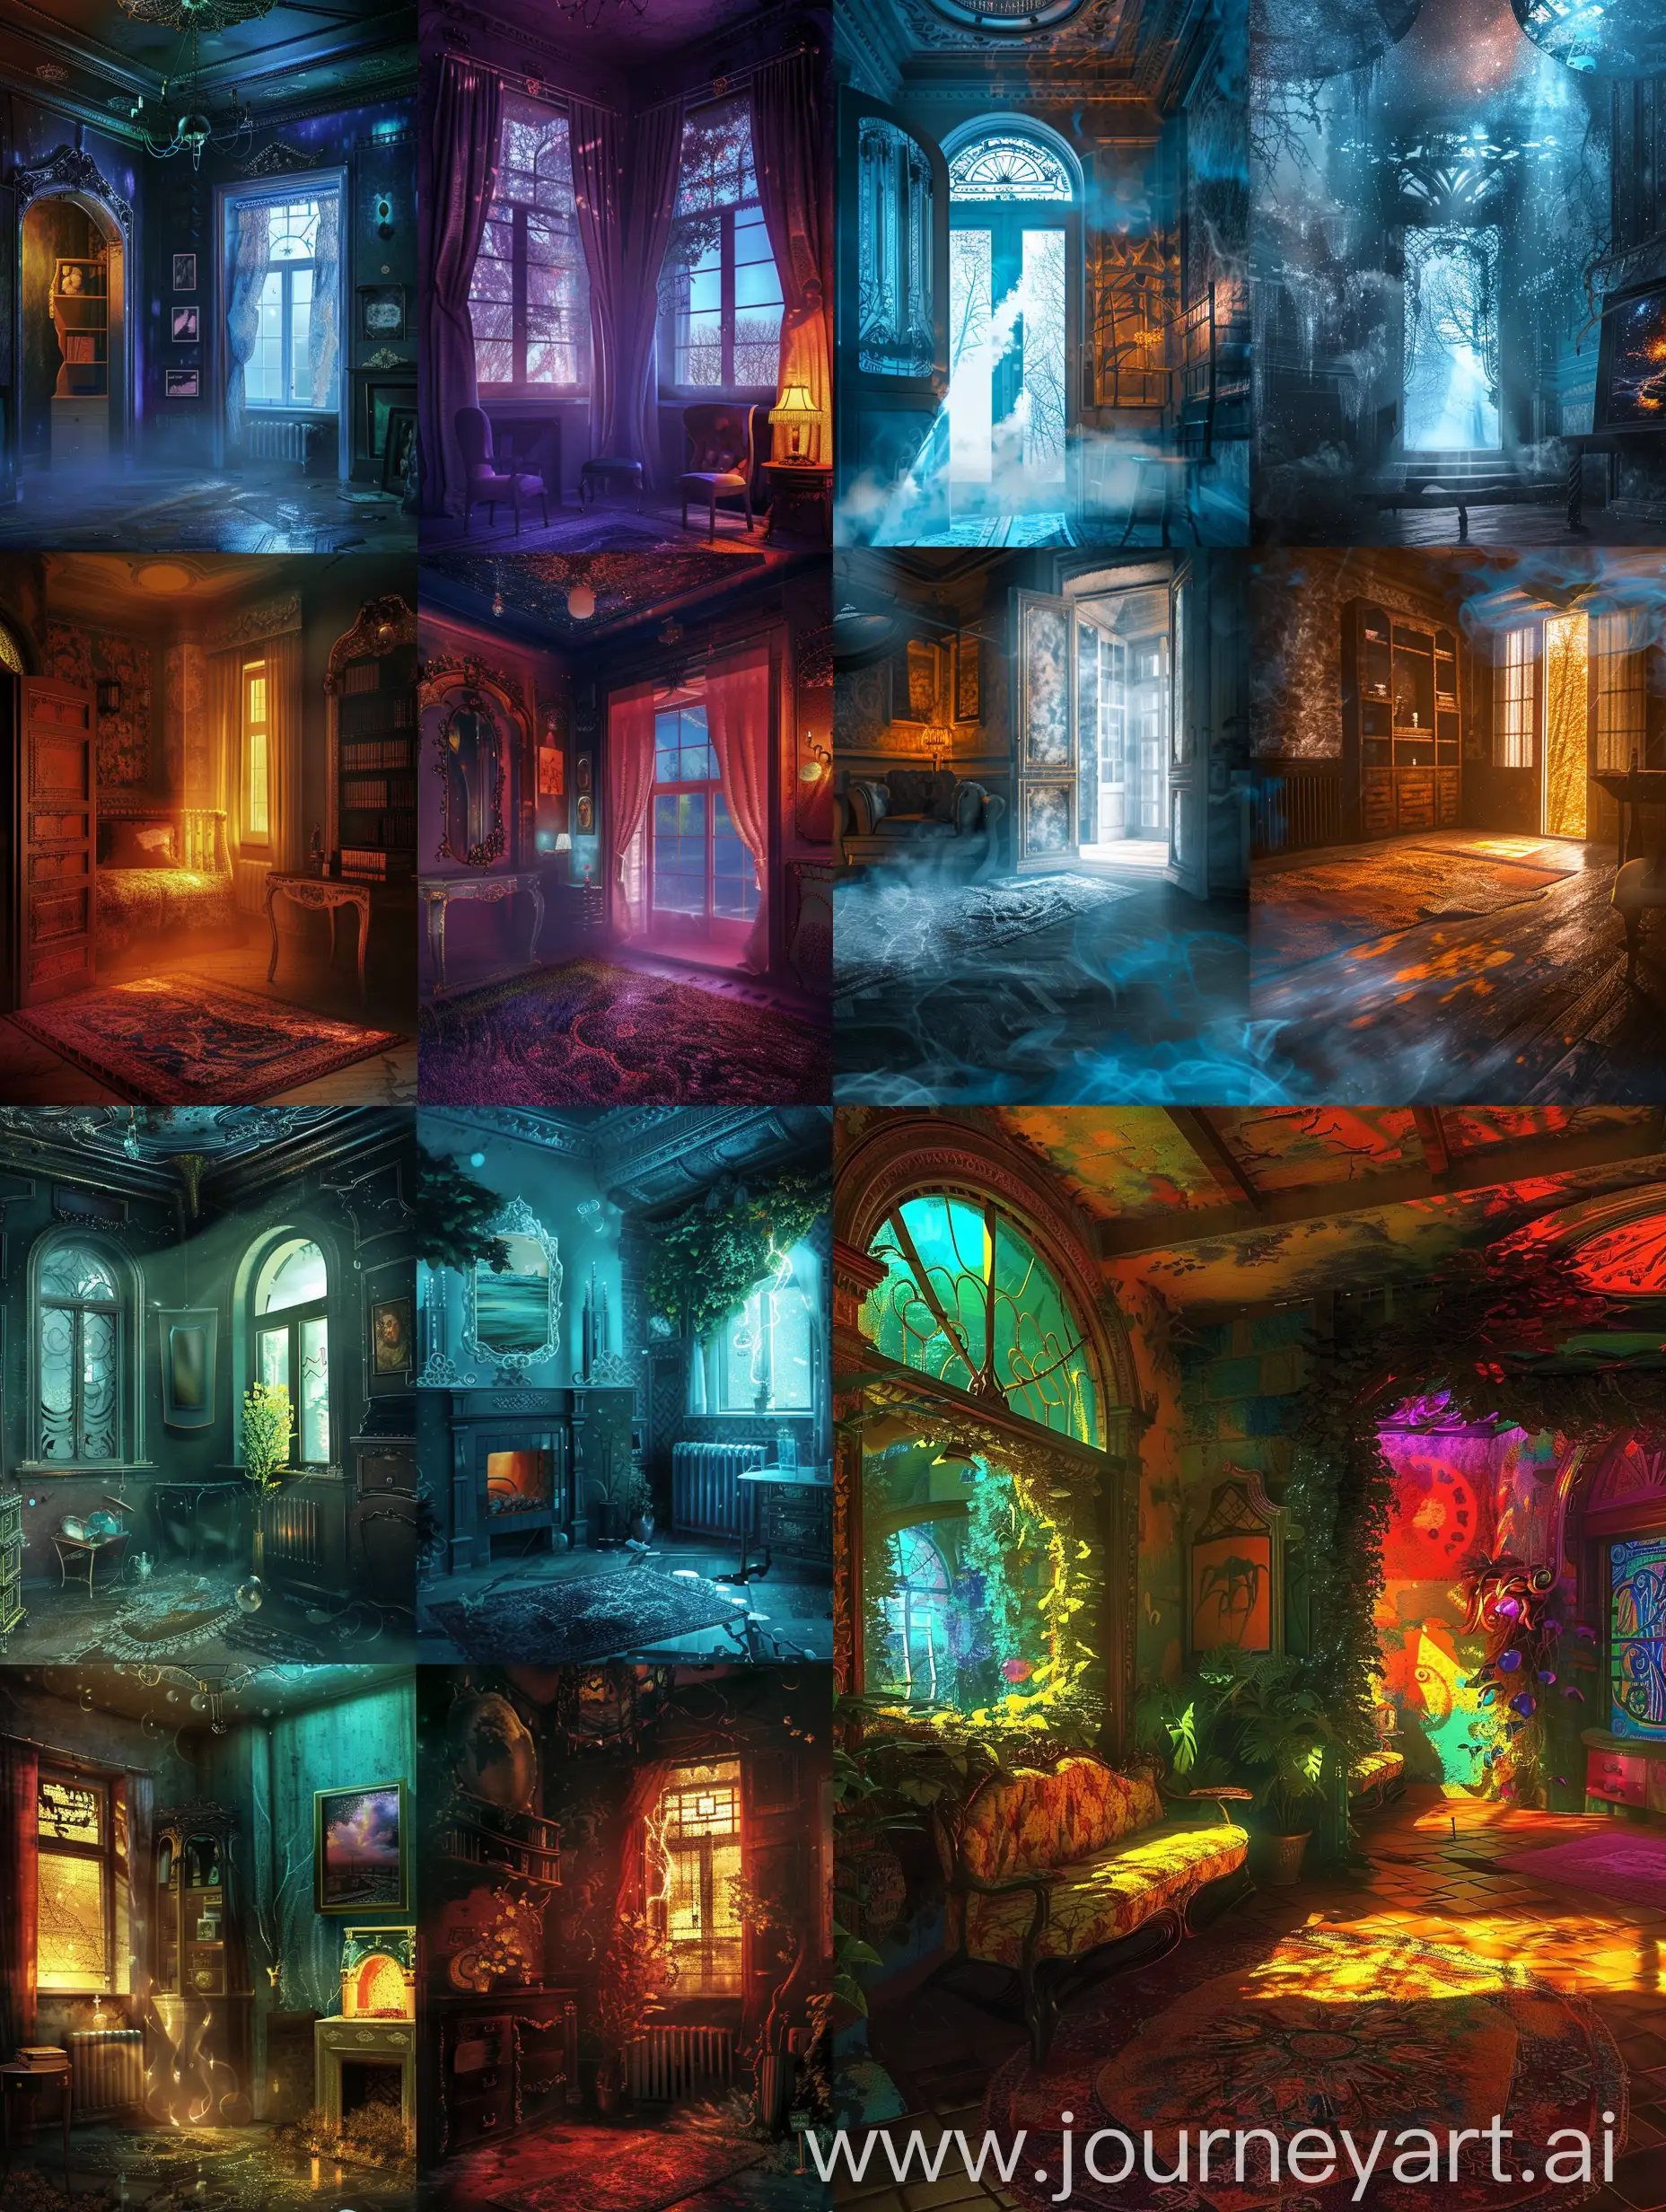 Interconnected-Dream-Rooms-HighQuality-Fantasy-Artwork-with-Vibrant-Colors